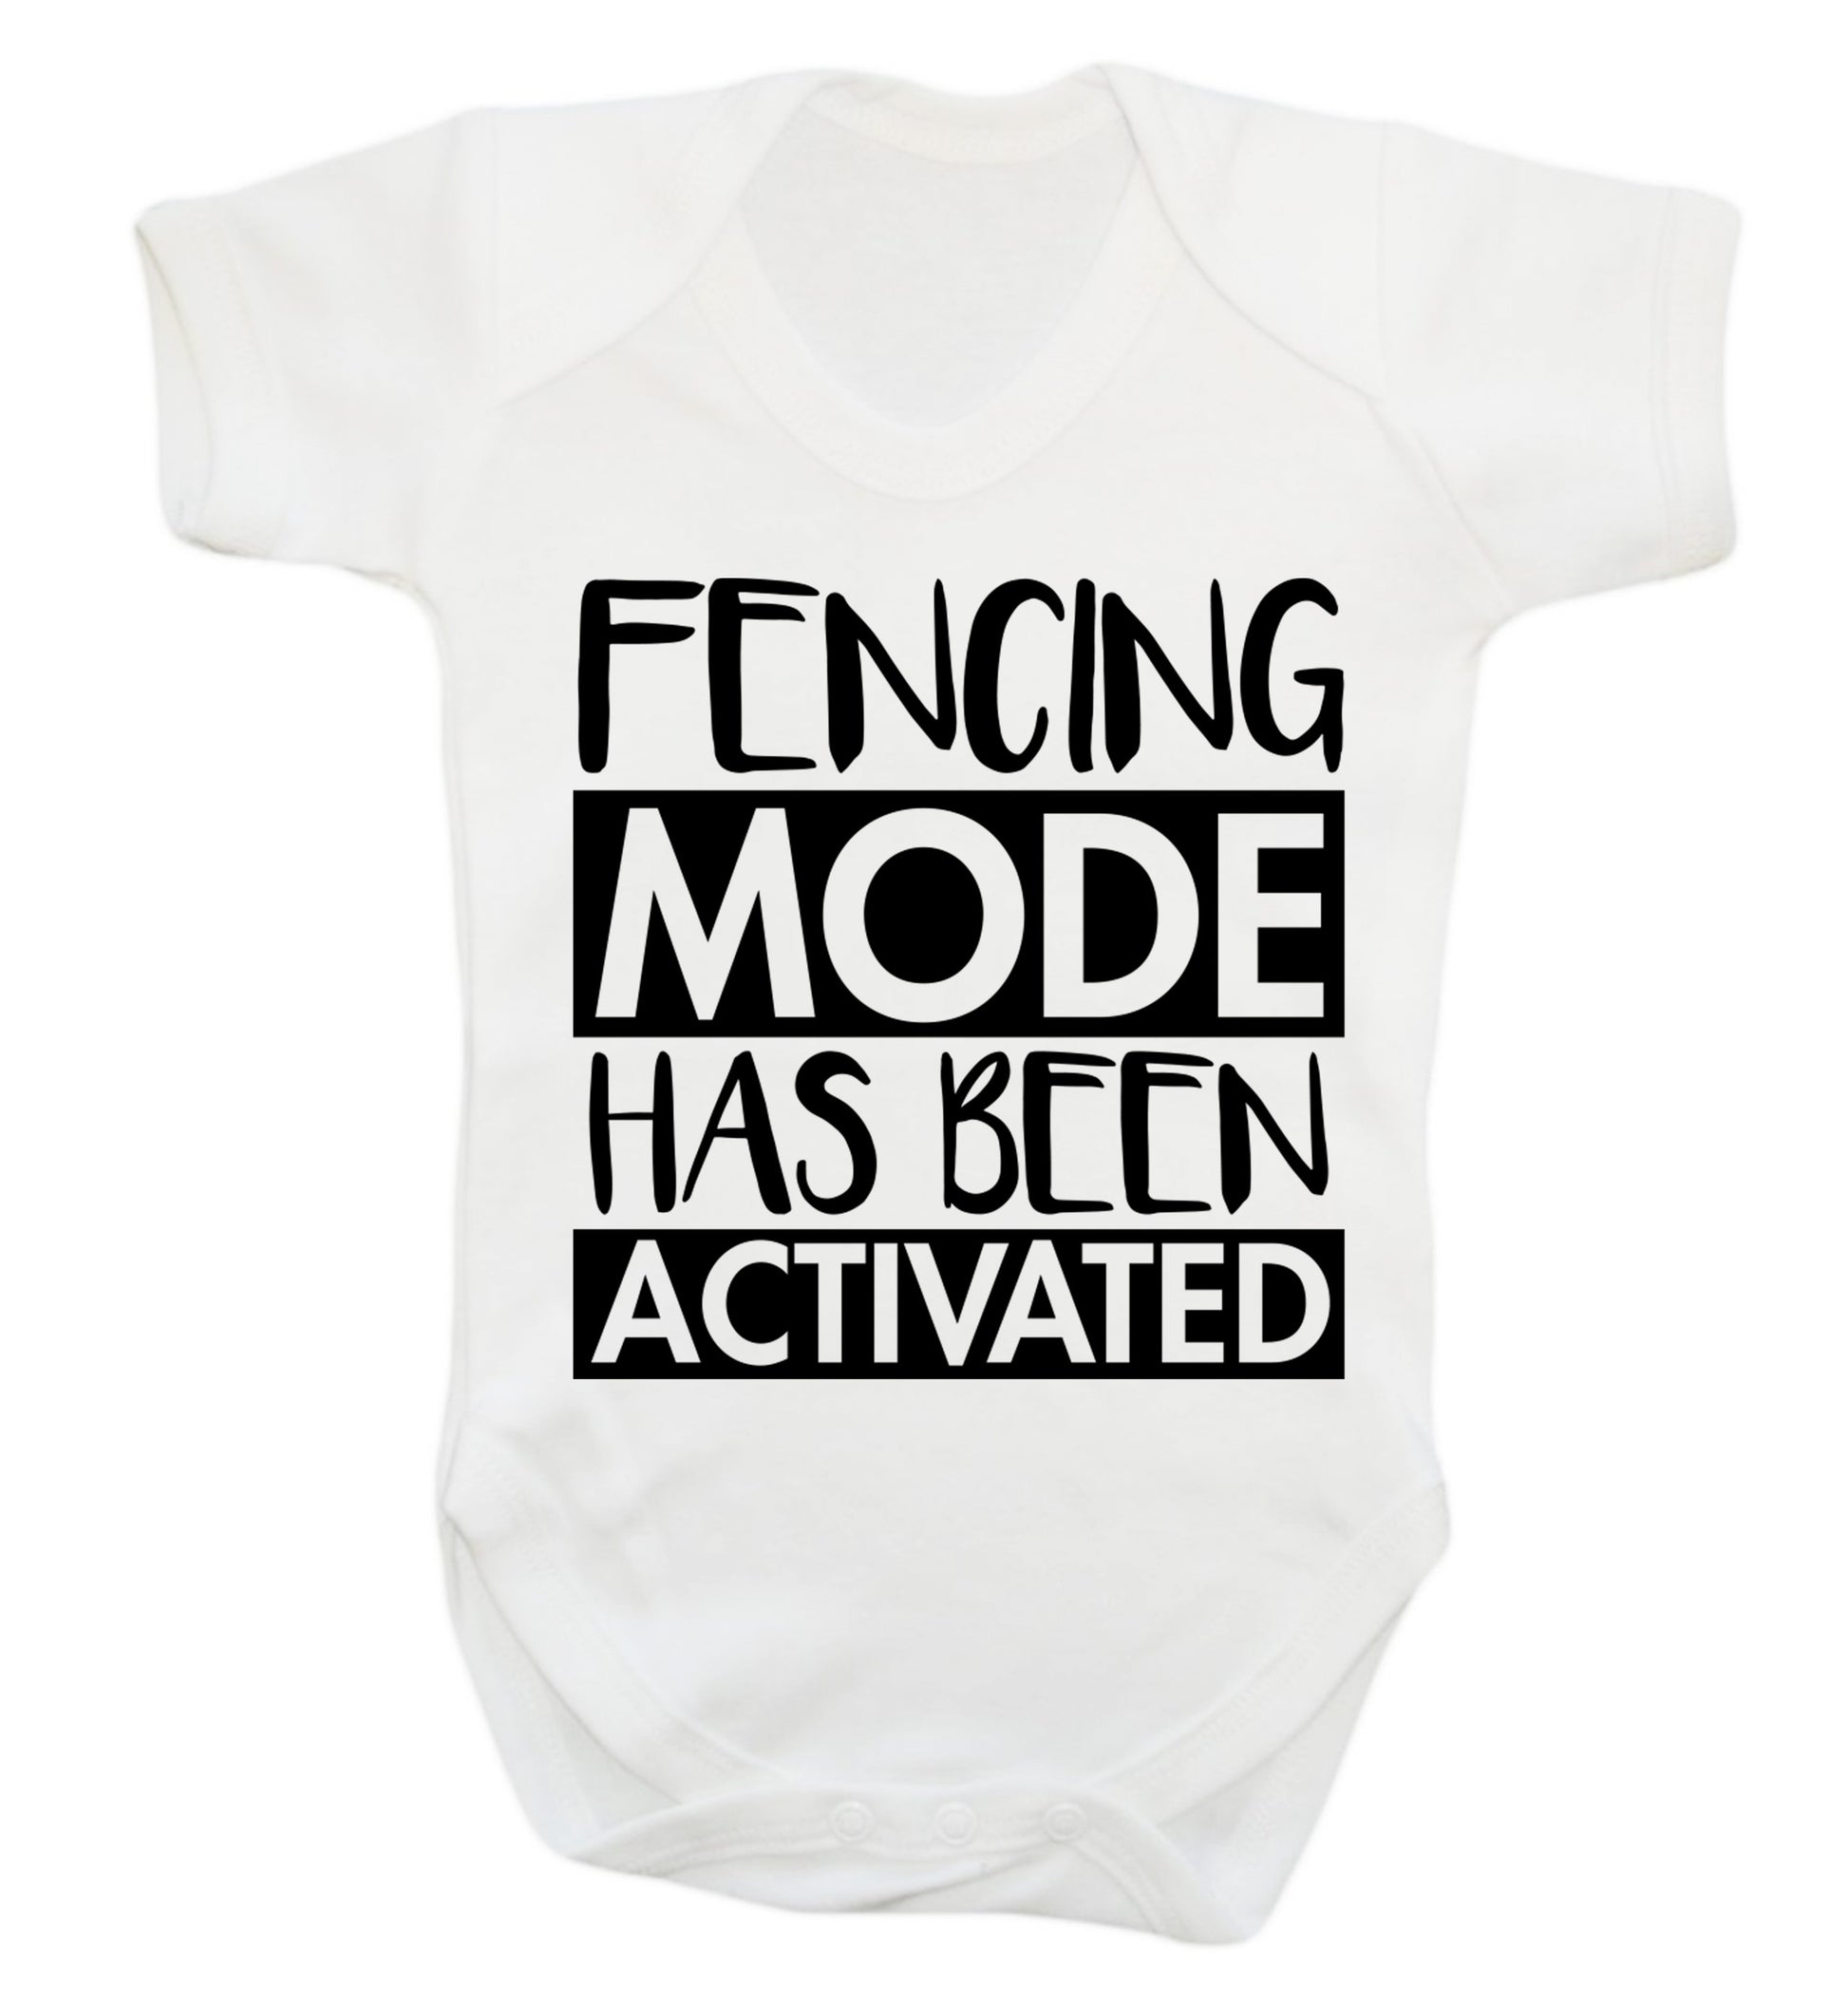 Fencing mode activated Baby Vest white 18-24 months